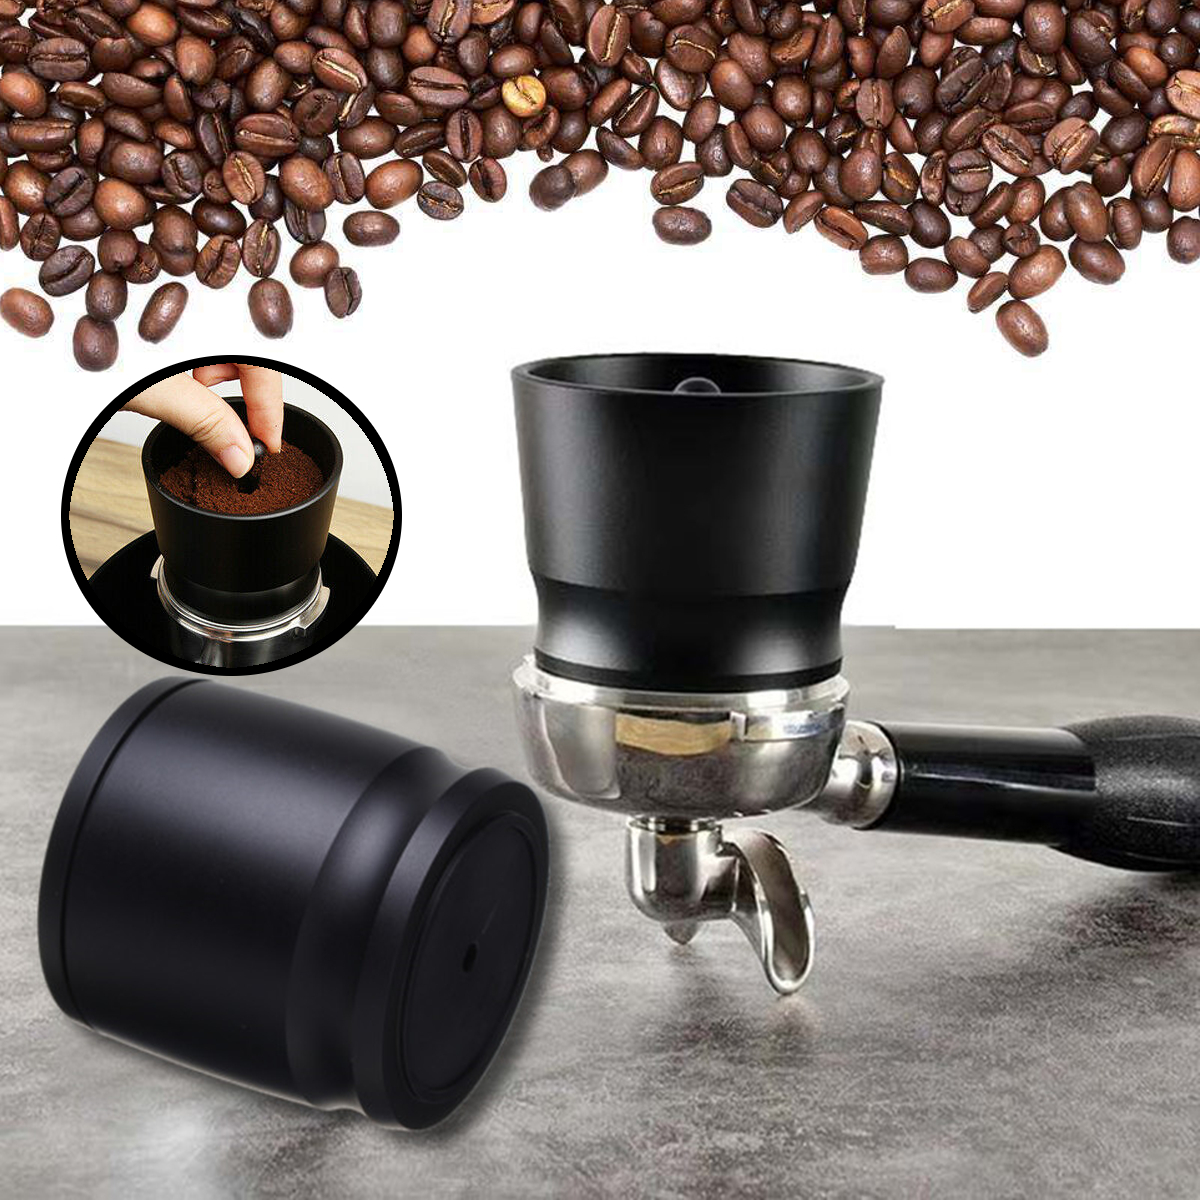 Aluminum-Dosing-Ring-for-Brewing-Bowl-Coffee-Powder-Accessories-for-58MM-Coffee-Tamper-Cup-1468128-2